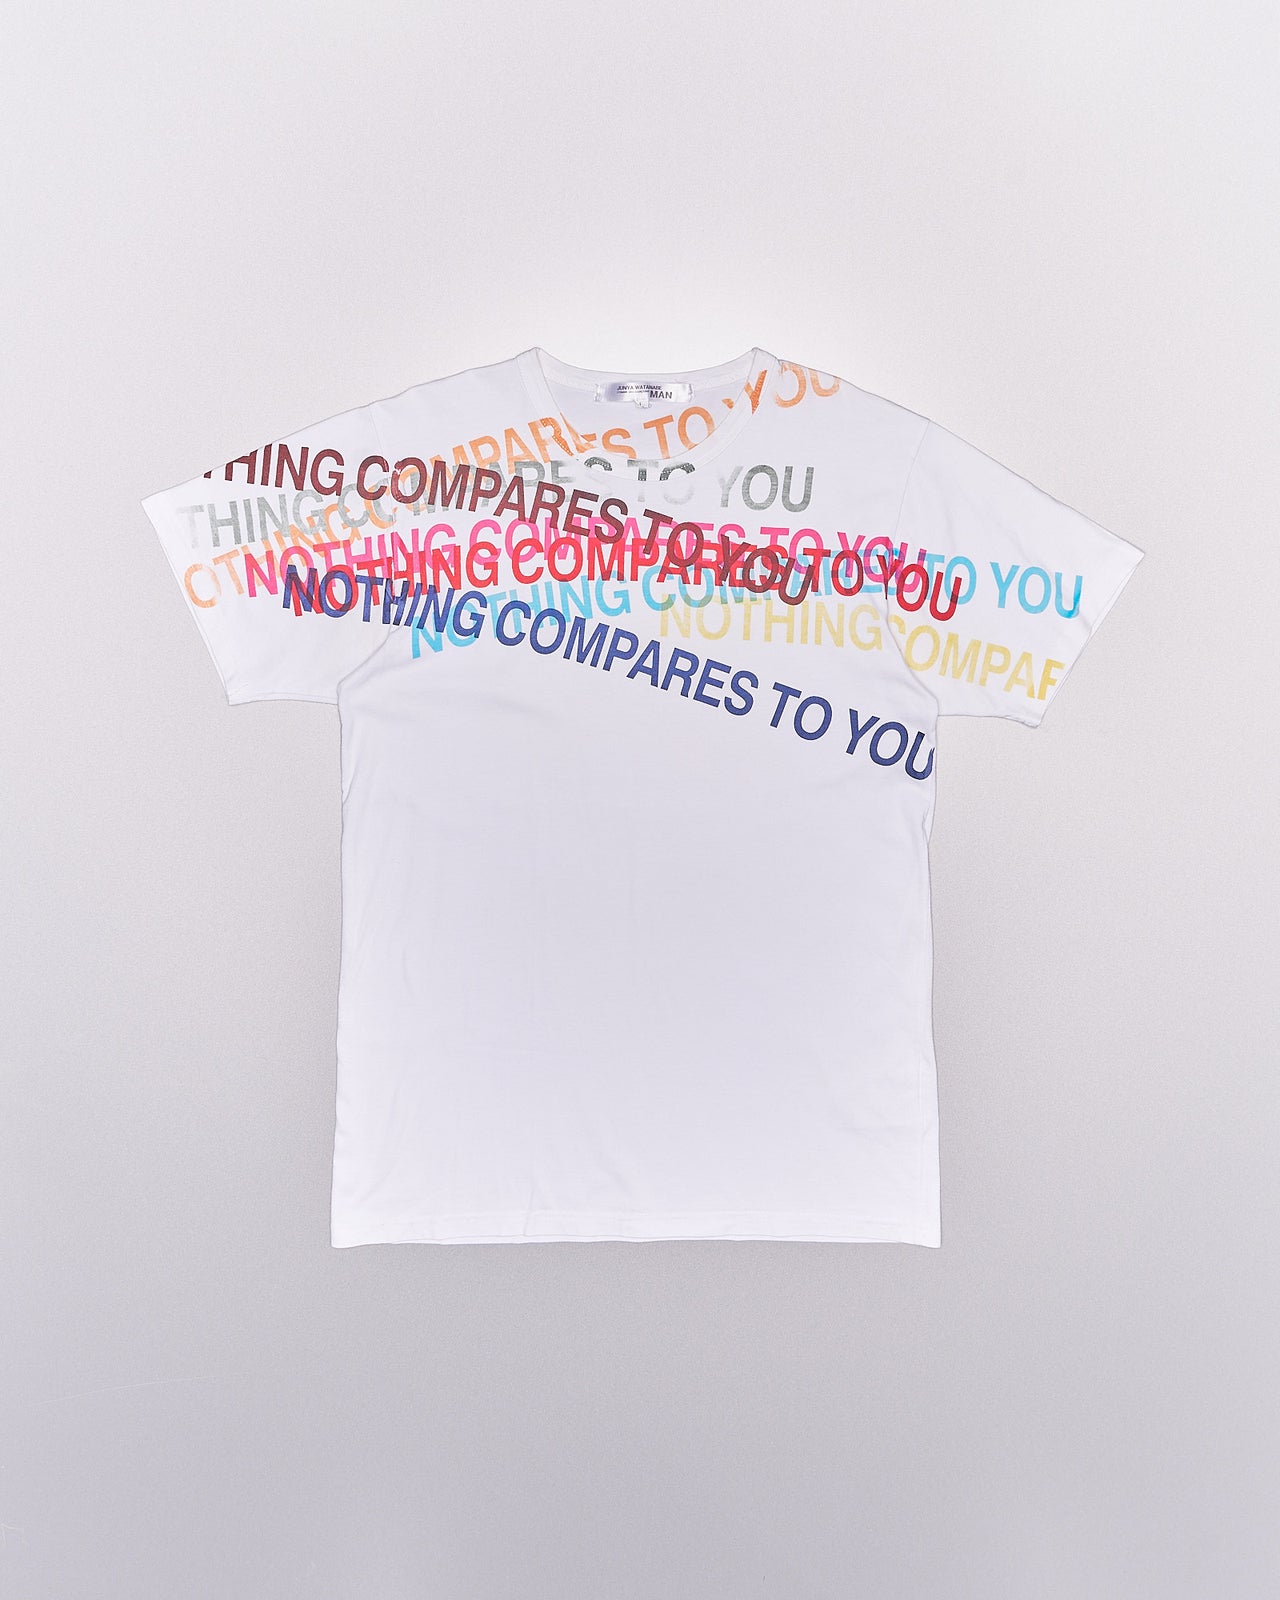 Comme des Garçons Junya Watanabe MAN SS 2002 "Nothing compares to you" t-shirt